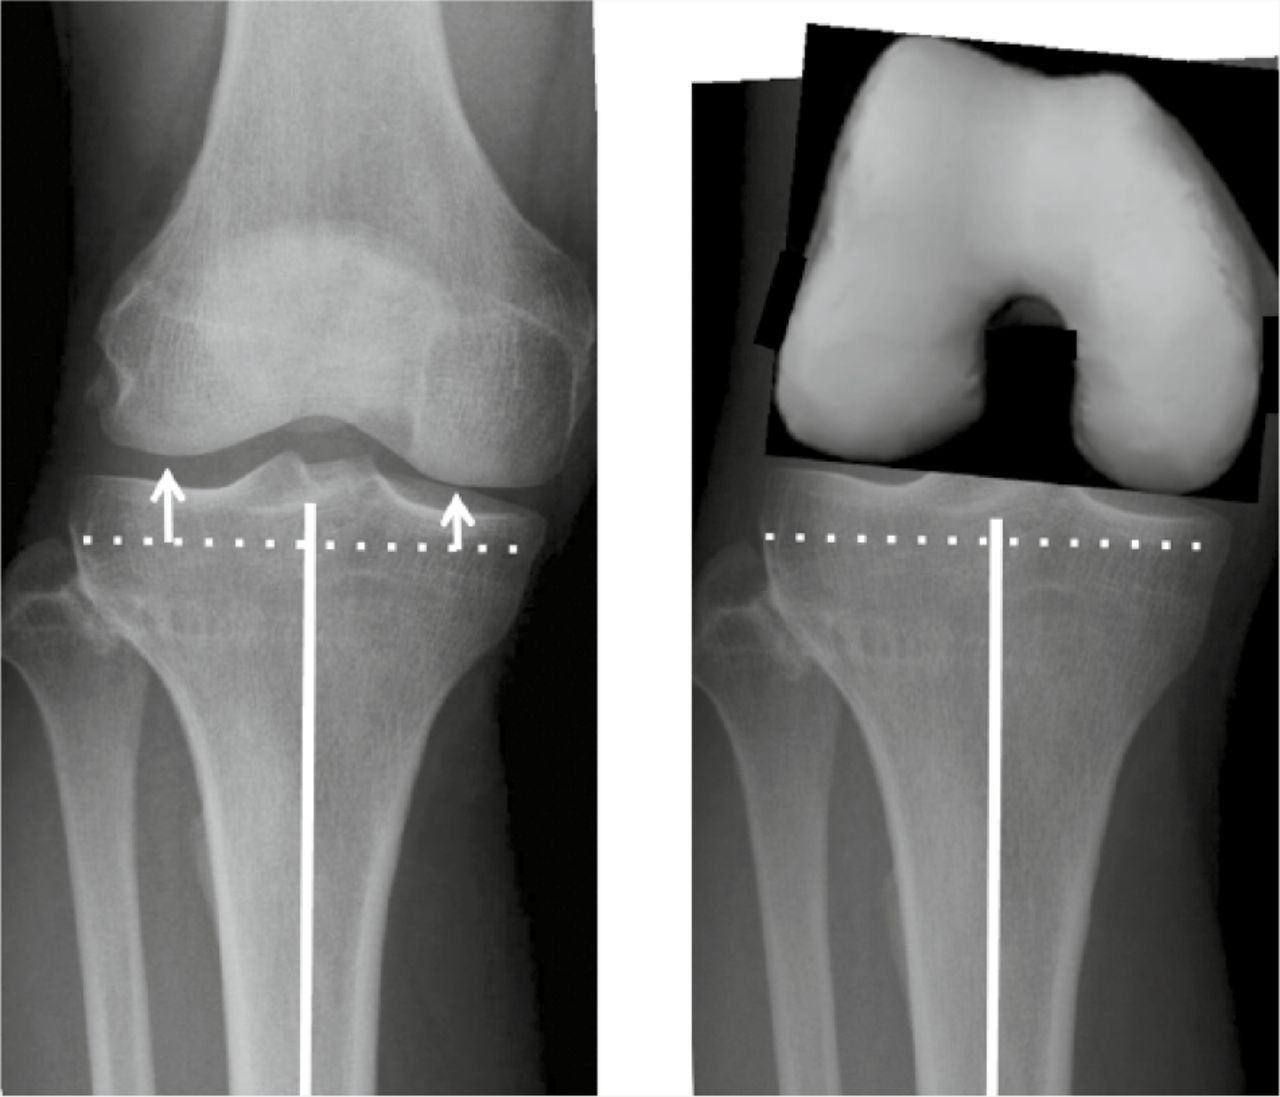 Fig. 10 
            The larger radius medial femoral condyle articulates with the lower medial tibial plateau in extension (left) and flexion (right). A tibial resection perpendicular to the tibial axis (dotted line) resects less bone from the medial tibia. In flexion the femoral component is conventionally placed in 3° external rotation relative to the posterior femoral condyles in order to compensate, however, this is only accurate for the typical patient and not every patient as there is individual variation in the discrepancy between the joint level heights.
          